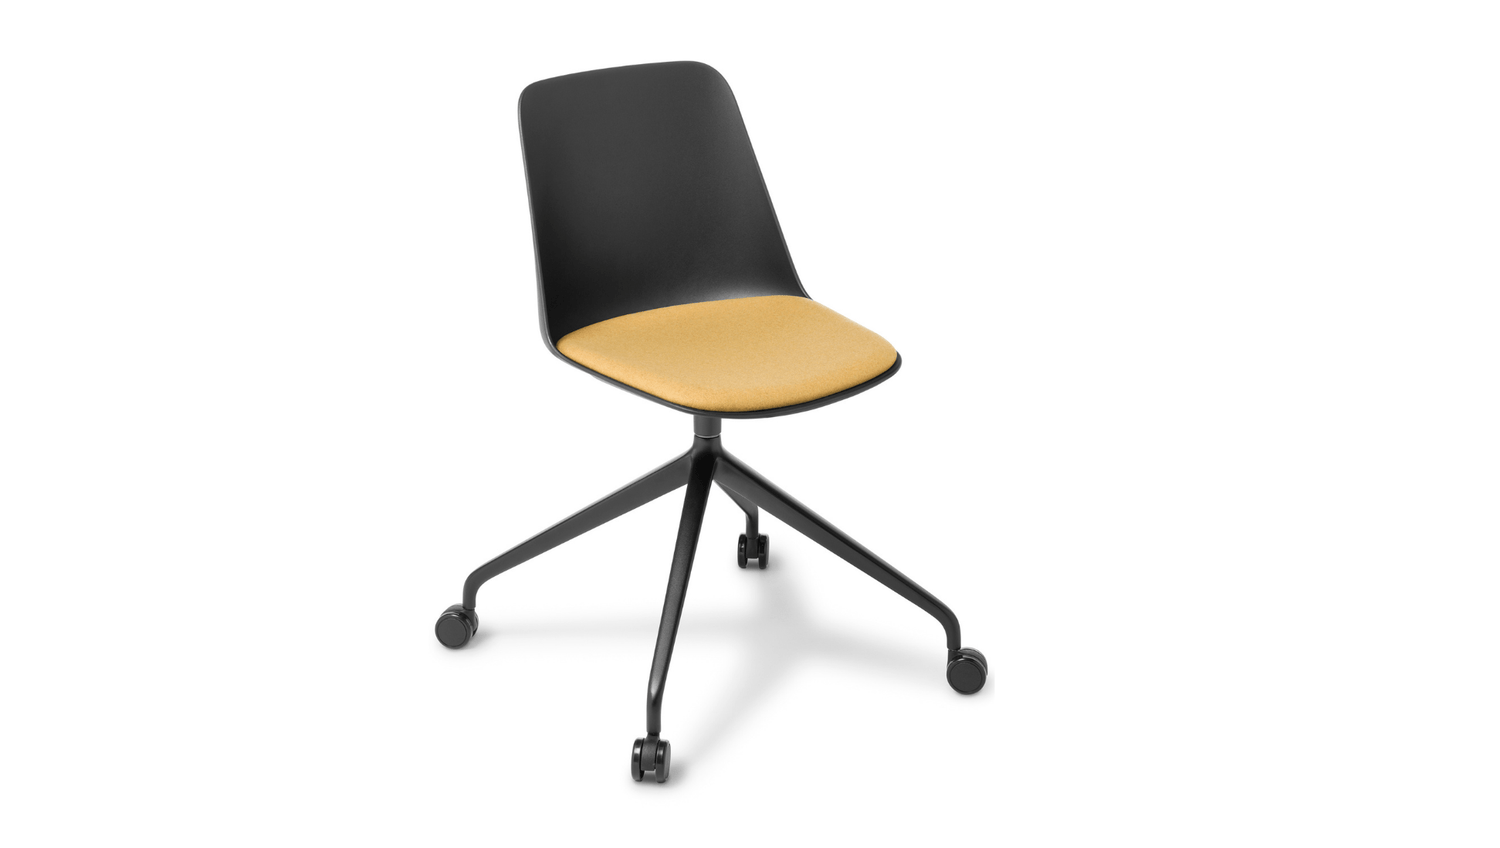 Seating Seat Upholstered / 4 Star Black Powder coated Castor base / Black Max Chair